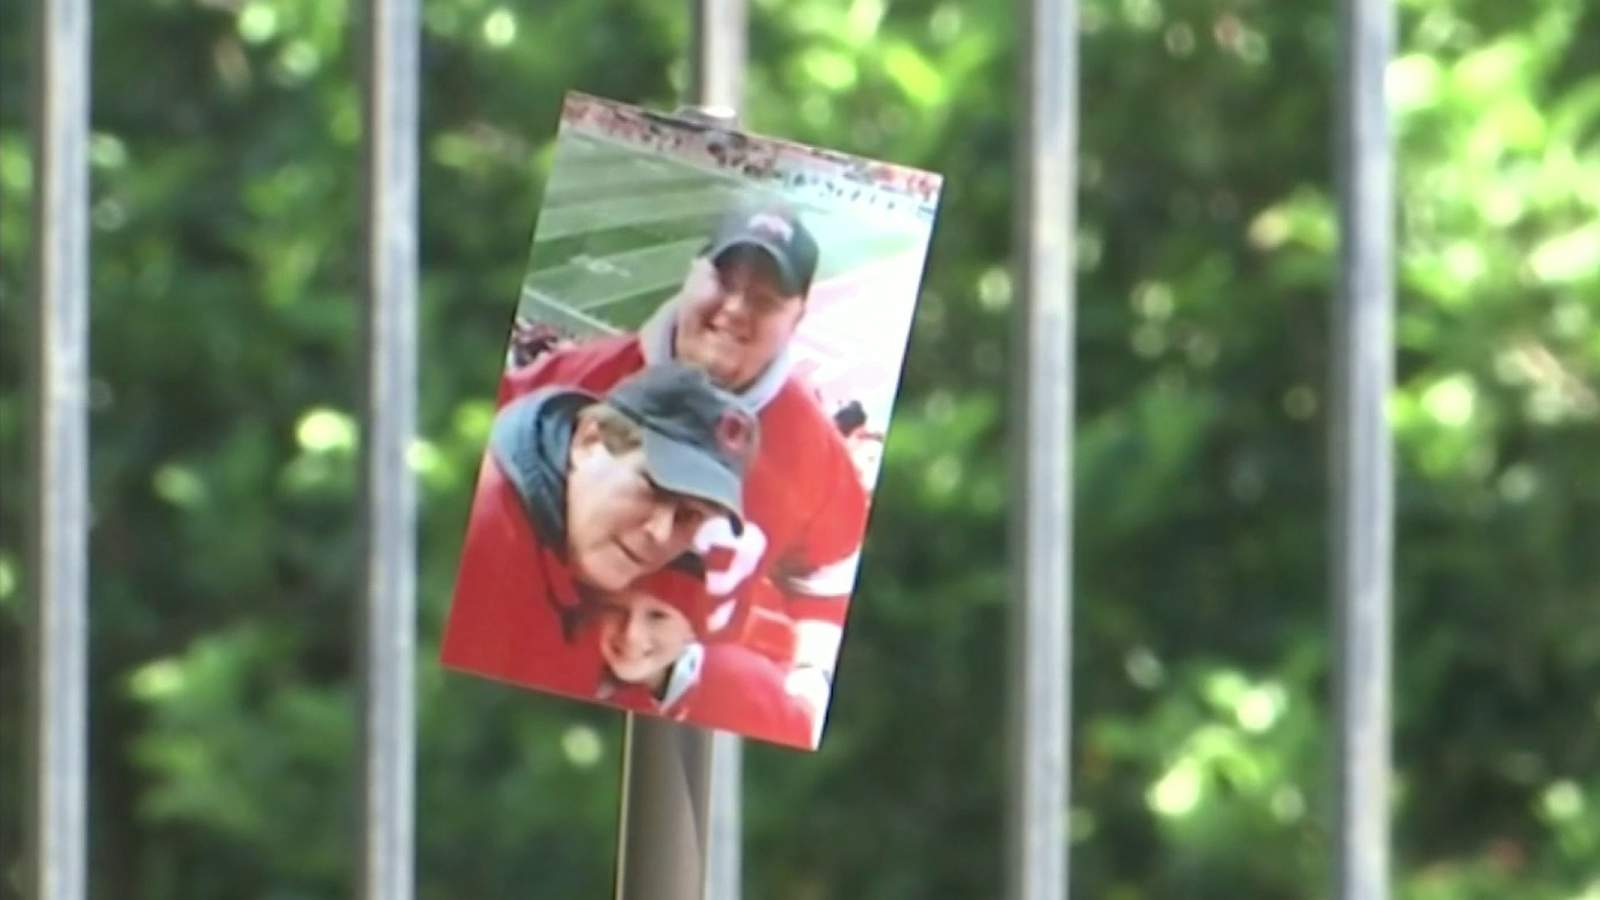 School district organizes fundraiser for family of slain father, son in Windermere